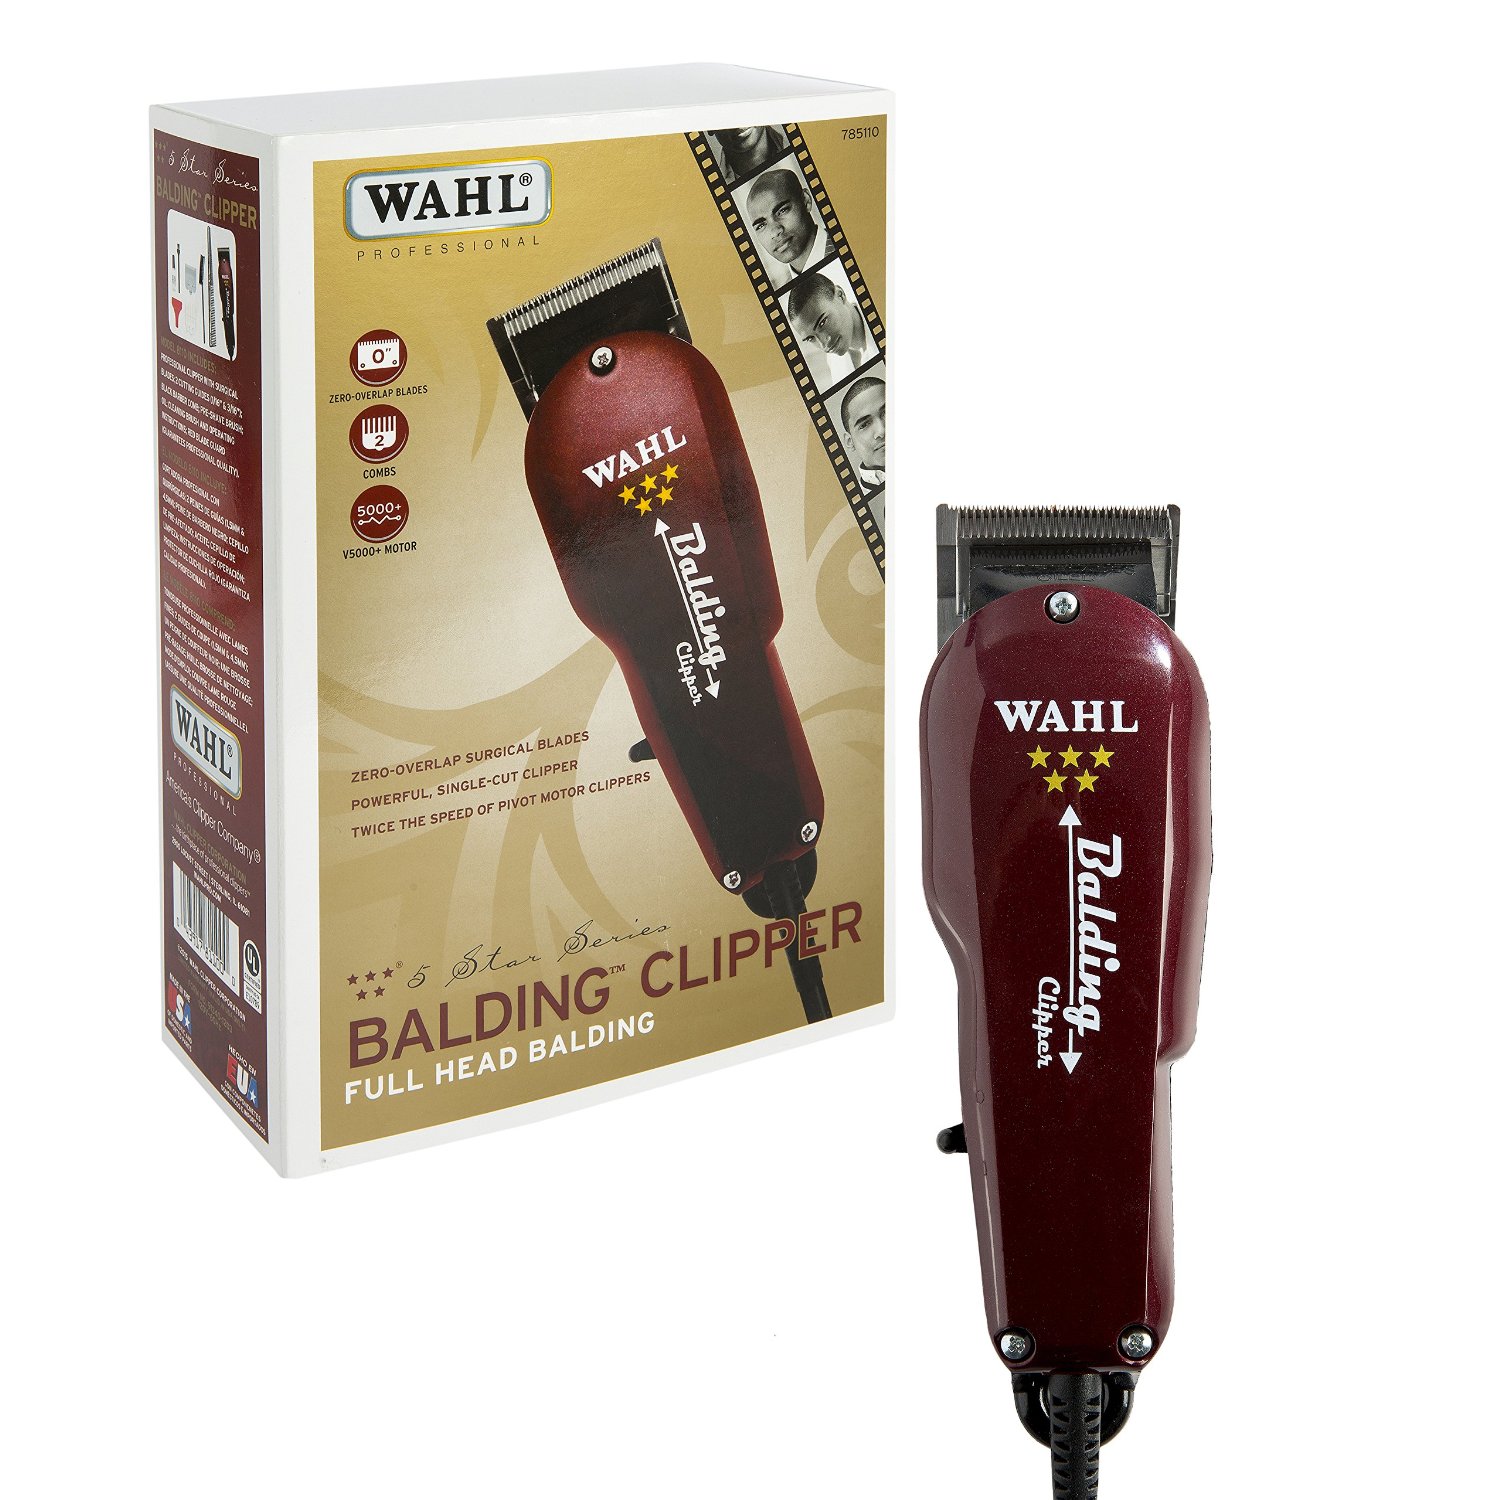 wahl clippers reviews